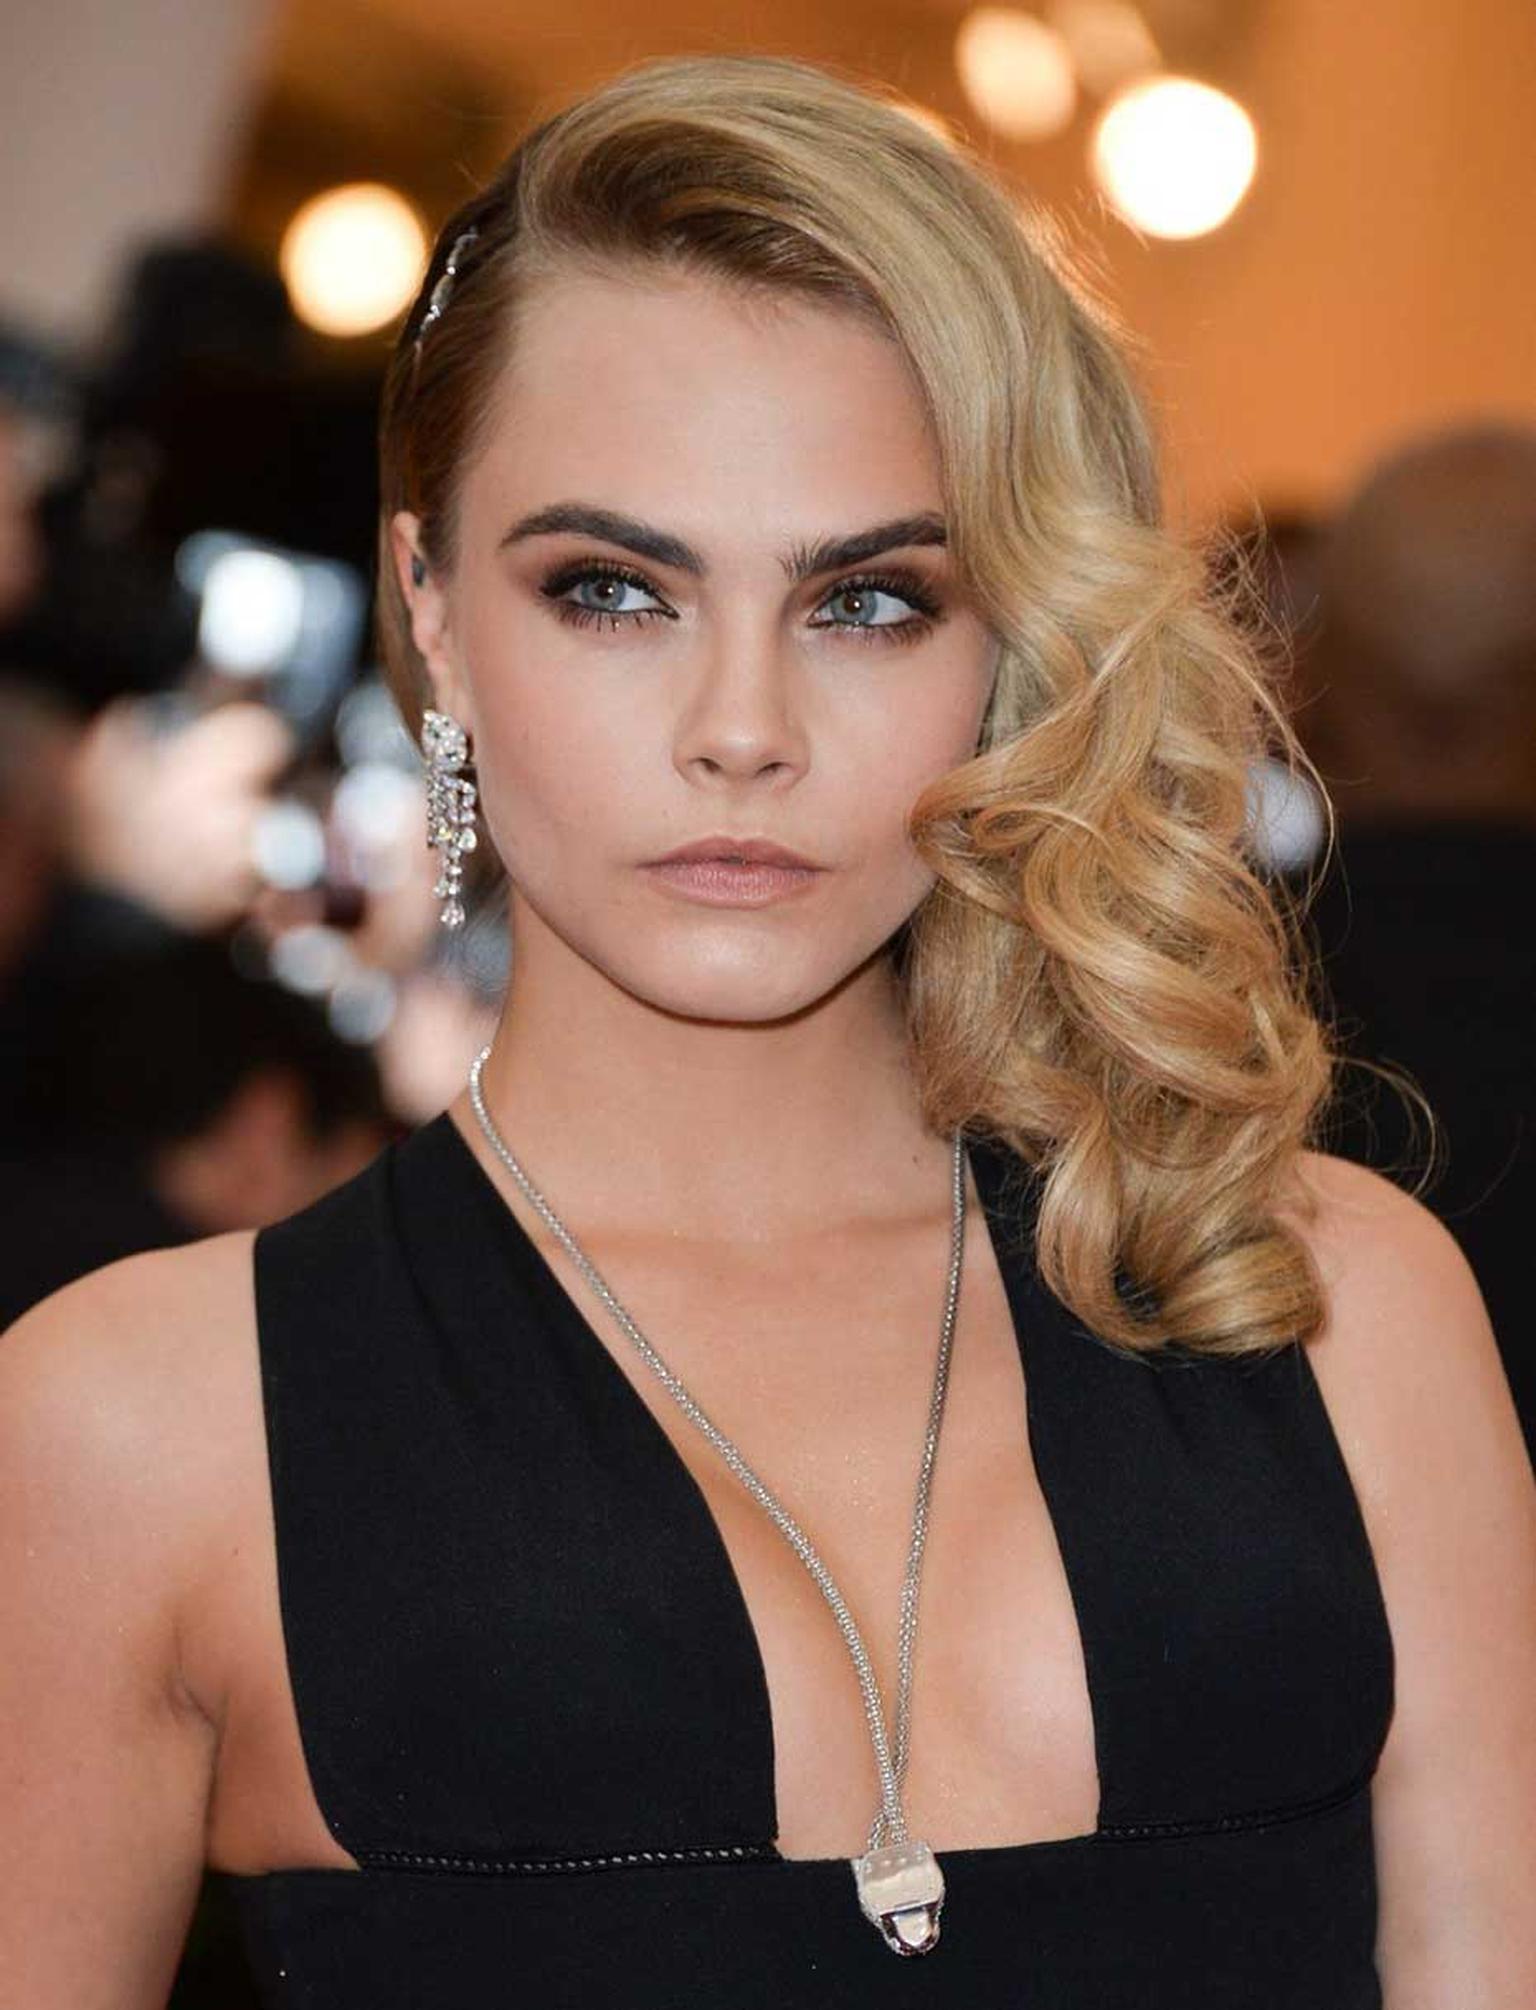 Cara Delevingne wore some of the most impressive jewels of the night, all from Cartier, including a Panthère de Cartier necklace, Panthère earrings and a diamond necklace holding her side-swept hair in place